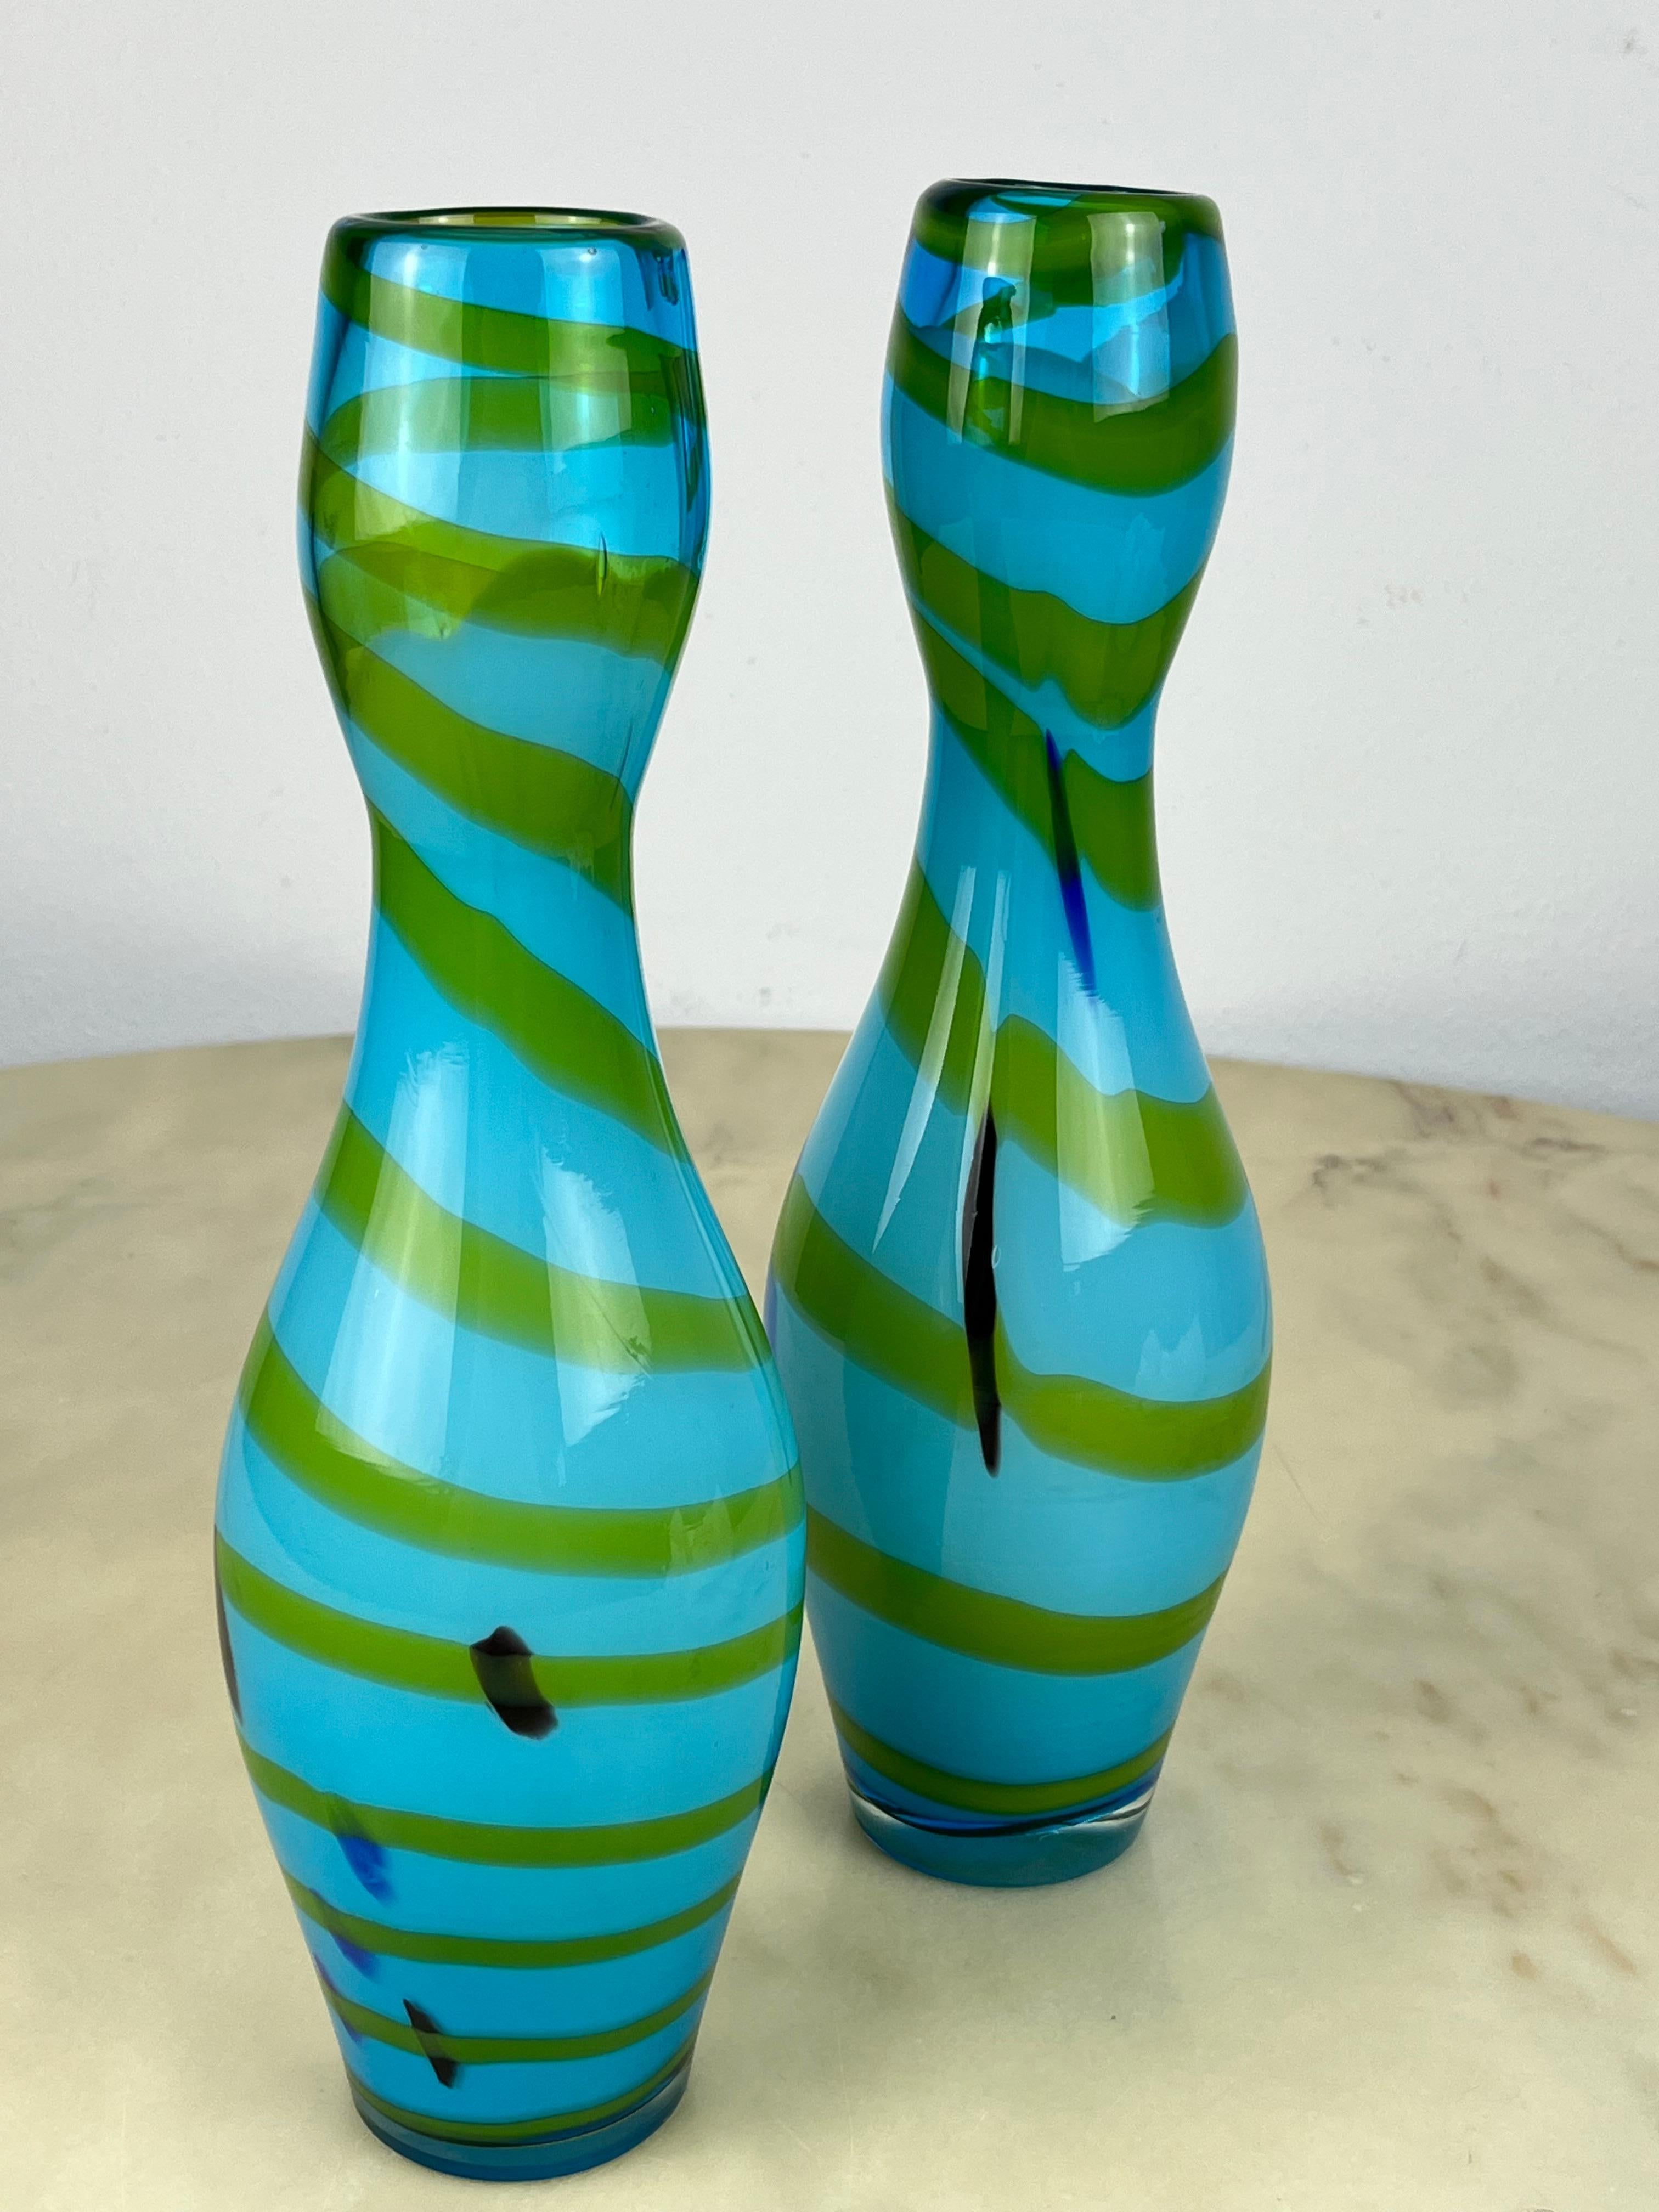 Late 20th Century Pair of Polychrome Murano Vases Attributed To Gio Ponti 1970s For Sale